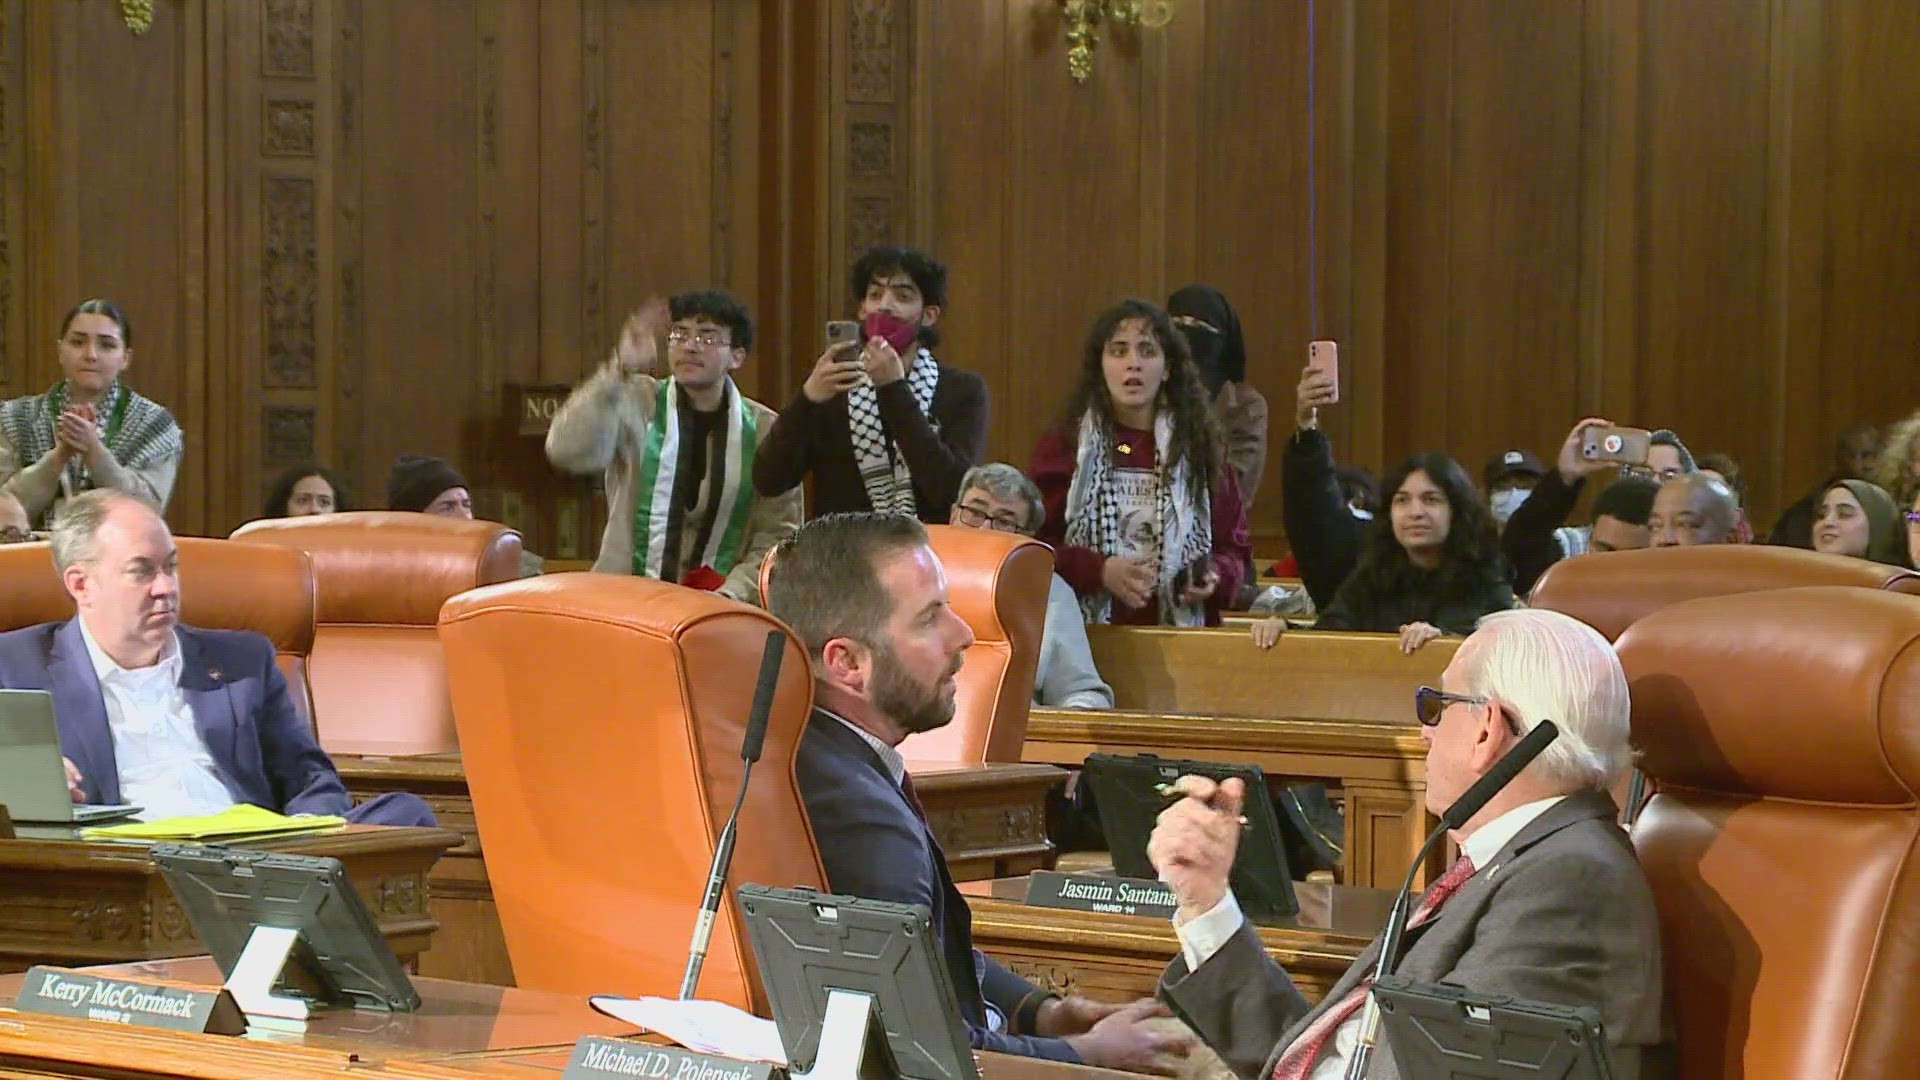 Pro-Palestinian demonstrators have interrupted a number of recent Council meetings with chanting and outbursts, prompting frustration for legislators.